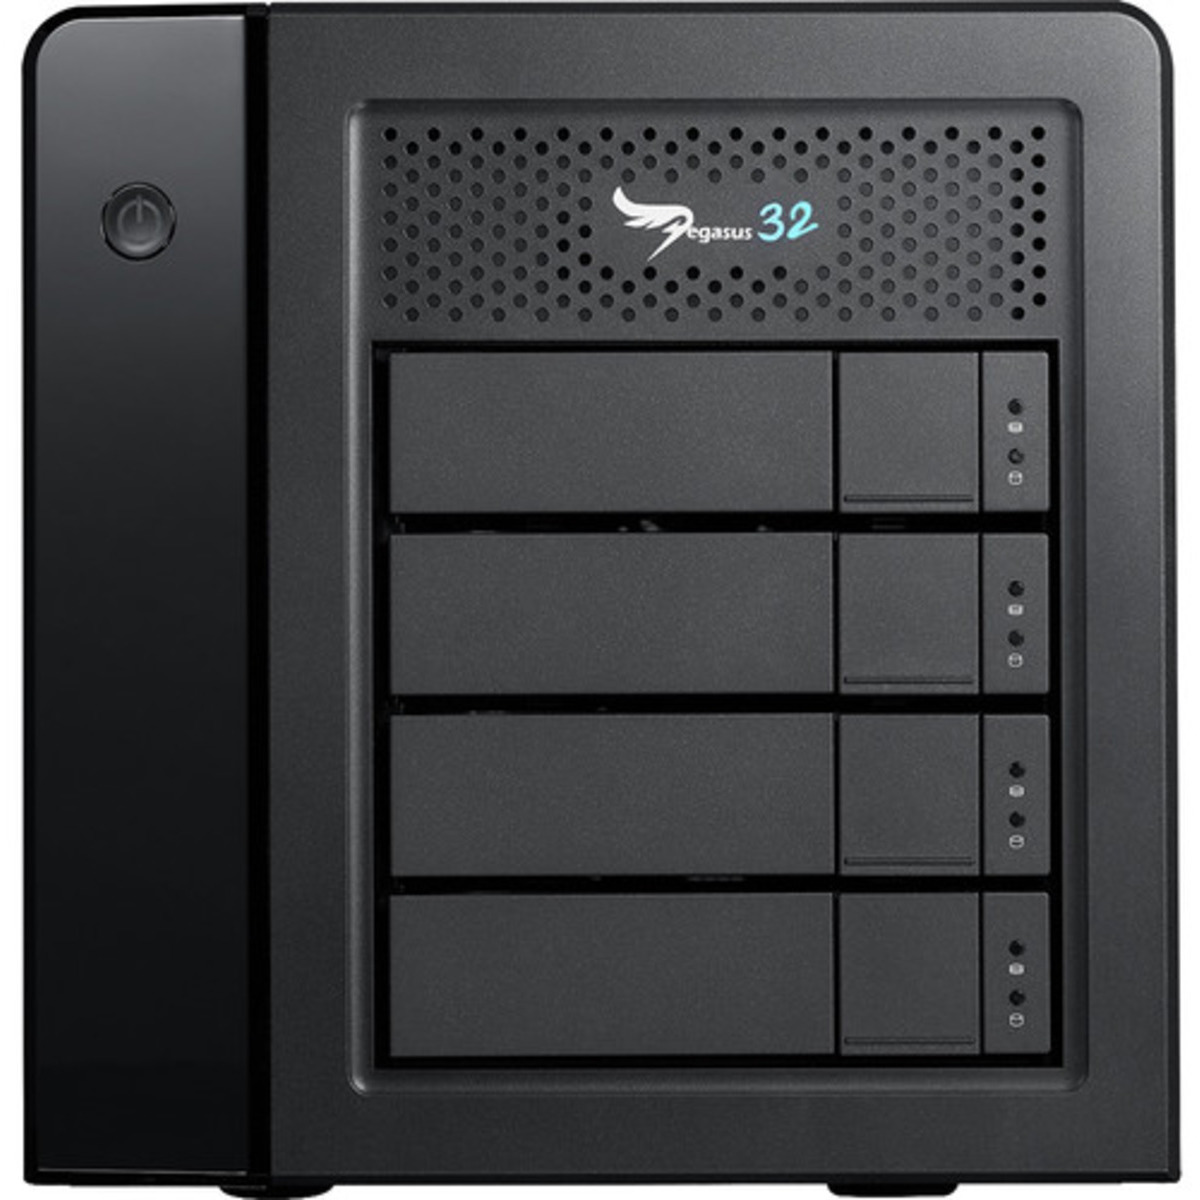 Promise Technology Pegasus32 R4 Thunderbolt 3 72tb 4-Bay Desktop Multimedia / Power User / Business DAS - Direct Attached Storage Device 4x18tb Seagate EXOS X18 ST18000NM000J 3.5 7200rpm SATA 6Gb/s HDD ENTERPRISE Class Drives Installed - Burn-In Tested Pegasus32 R4 Thunderbolt 3